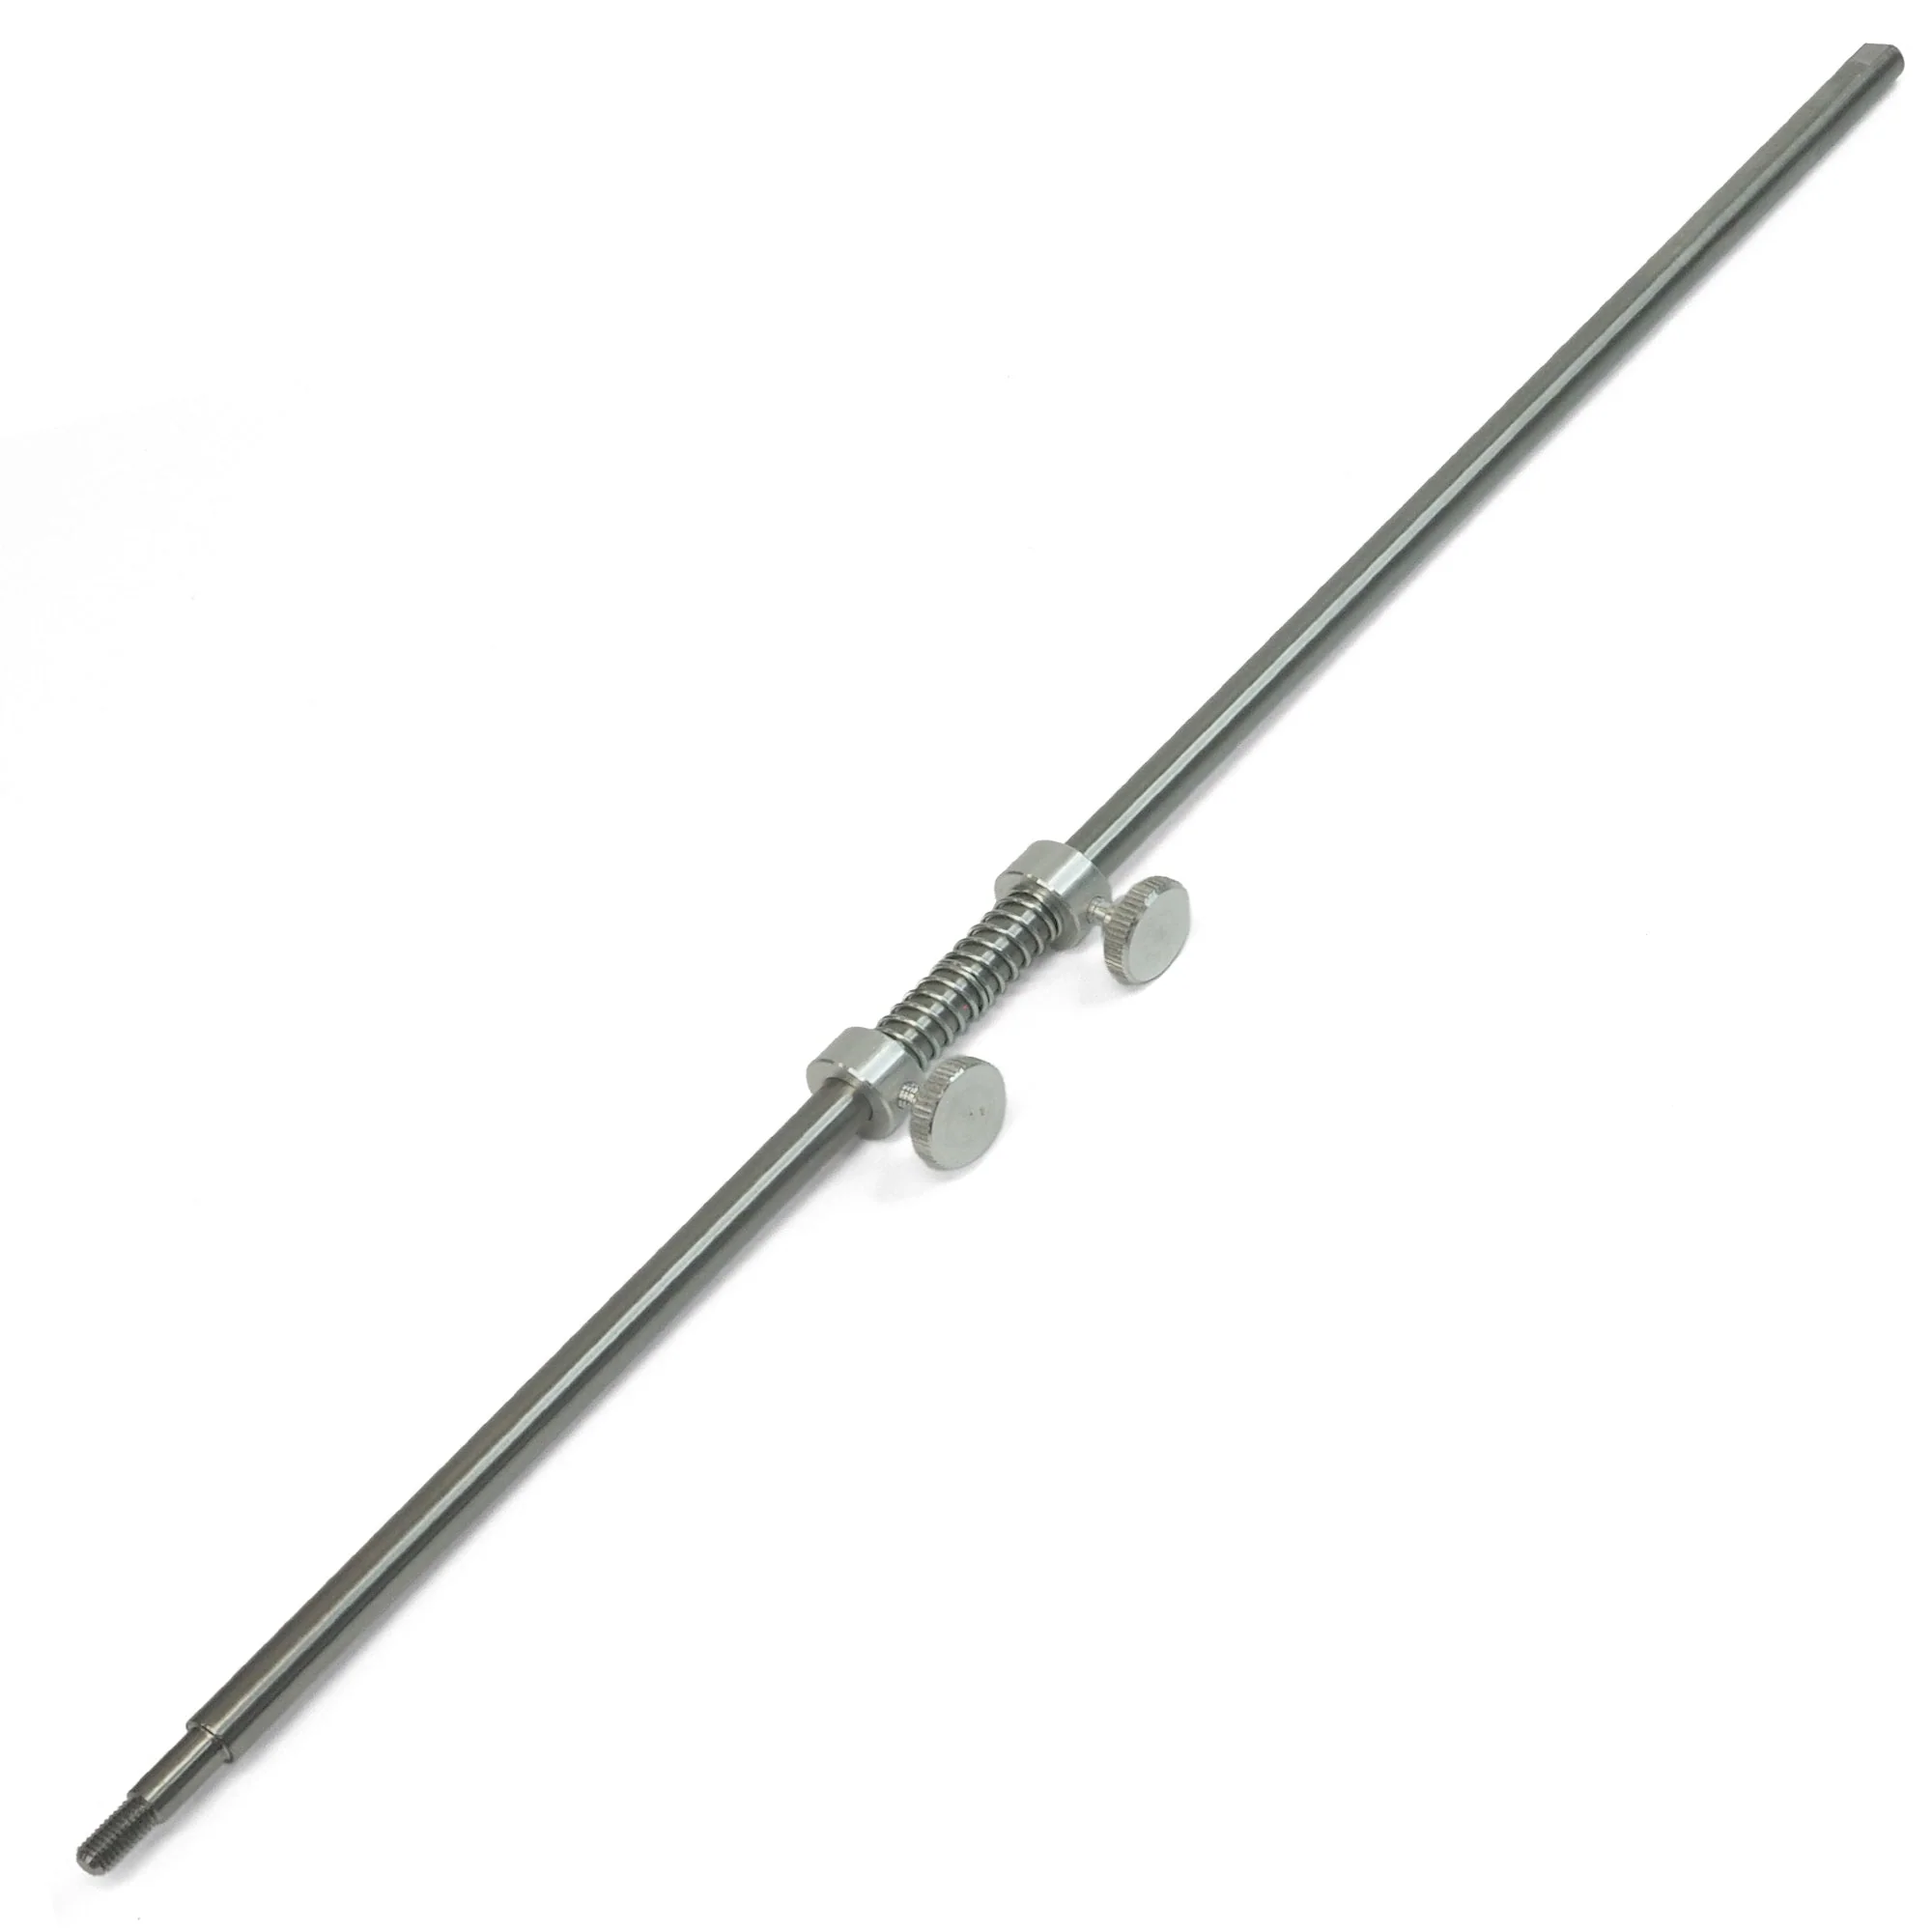 Whats the overall length on this rod?